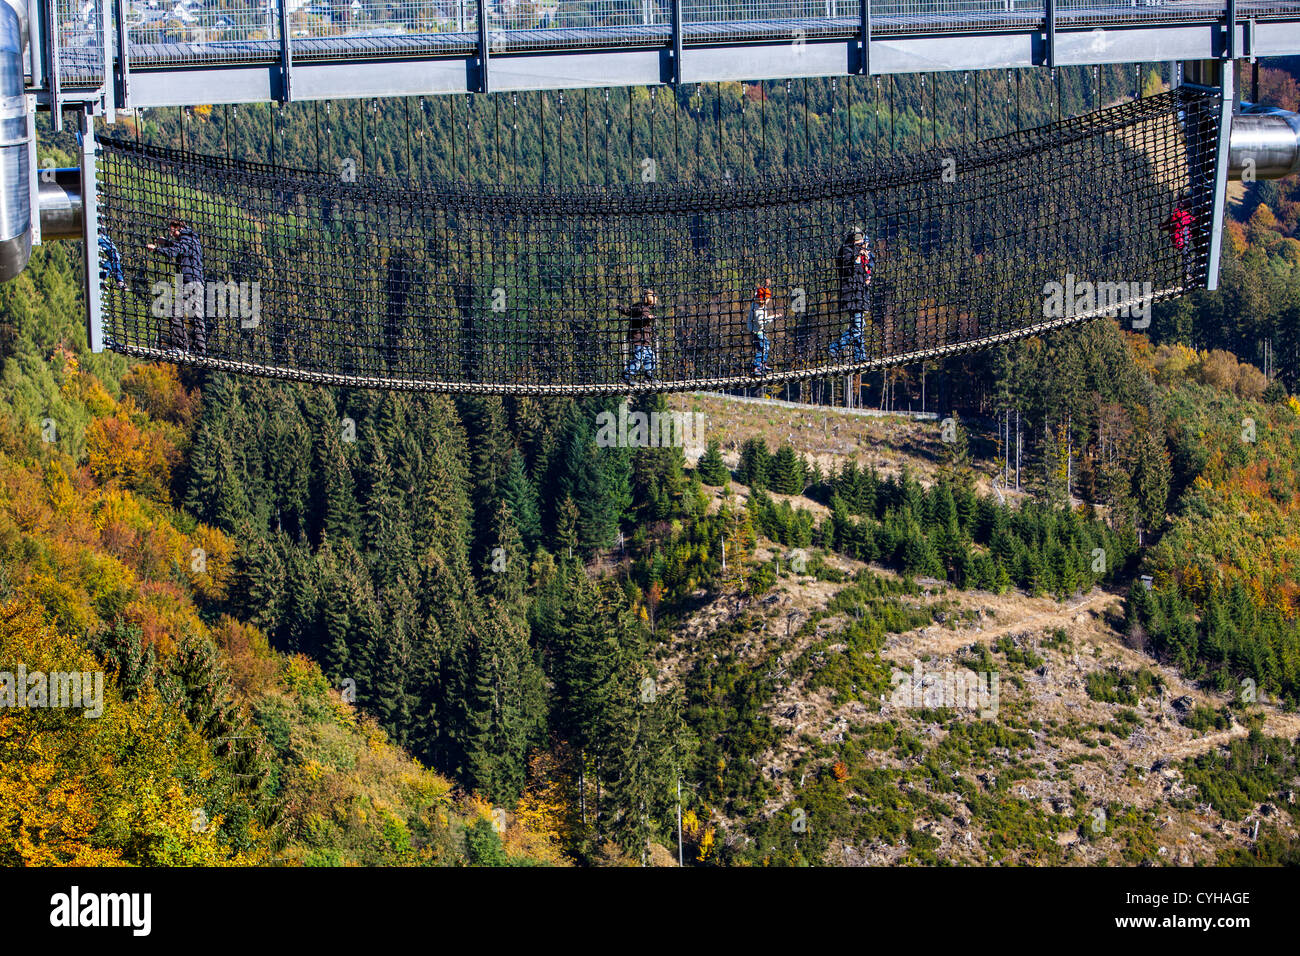 Panoramic experience bridge, 400 meter long bridge over trees and a valley to observe the nature of the region. Stock Photo